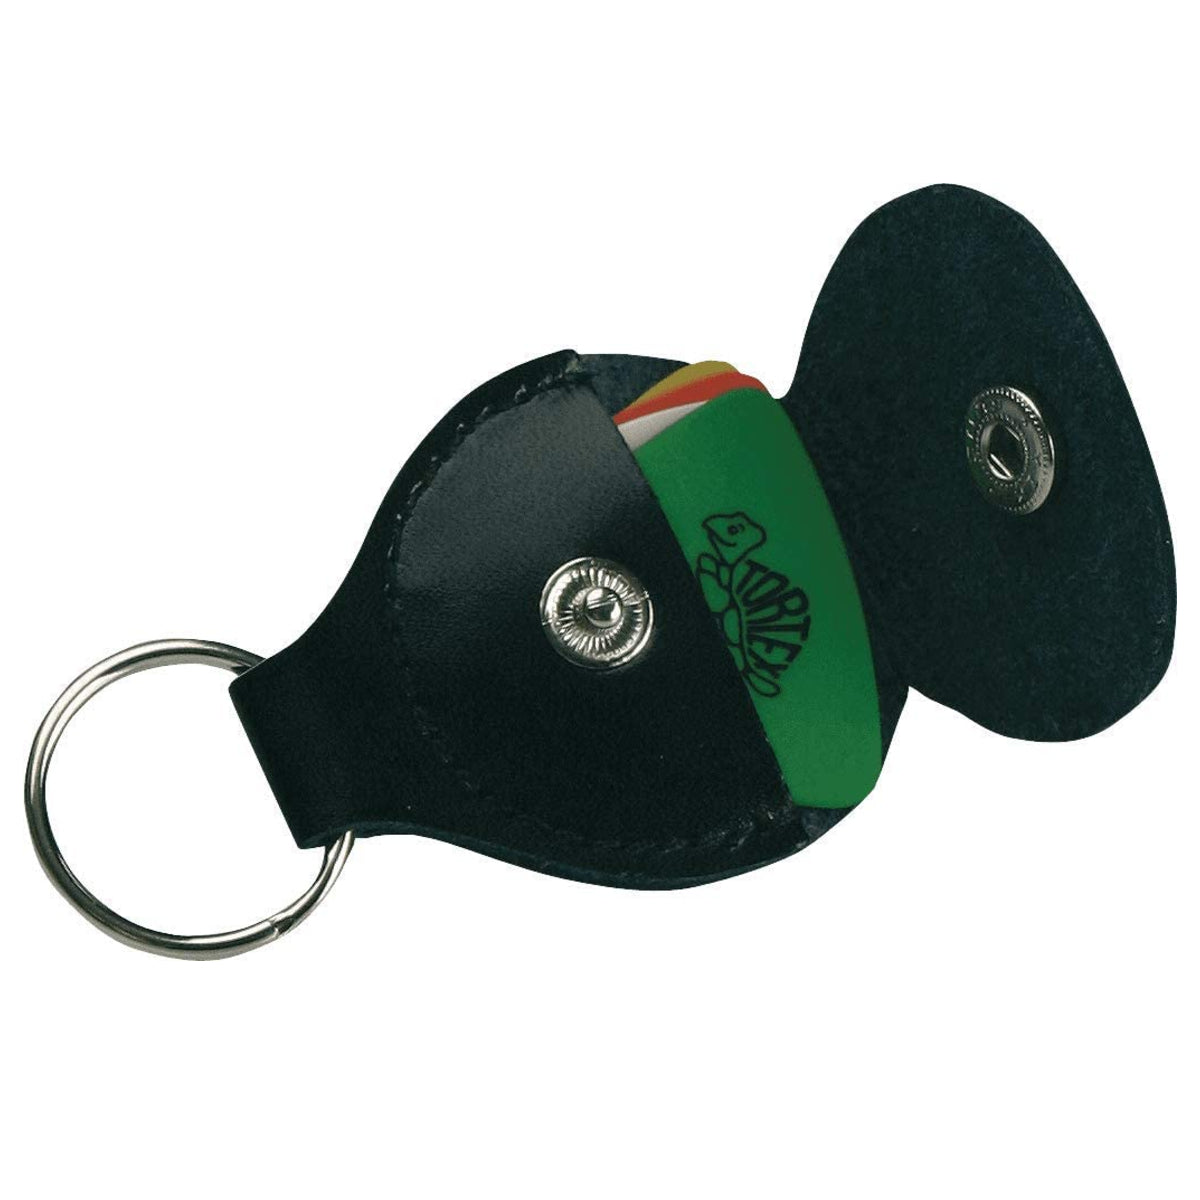 Dunlop 5200 Pickers Pouch with Keyring Black Gold Logo - EACH